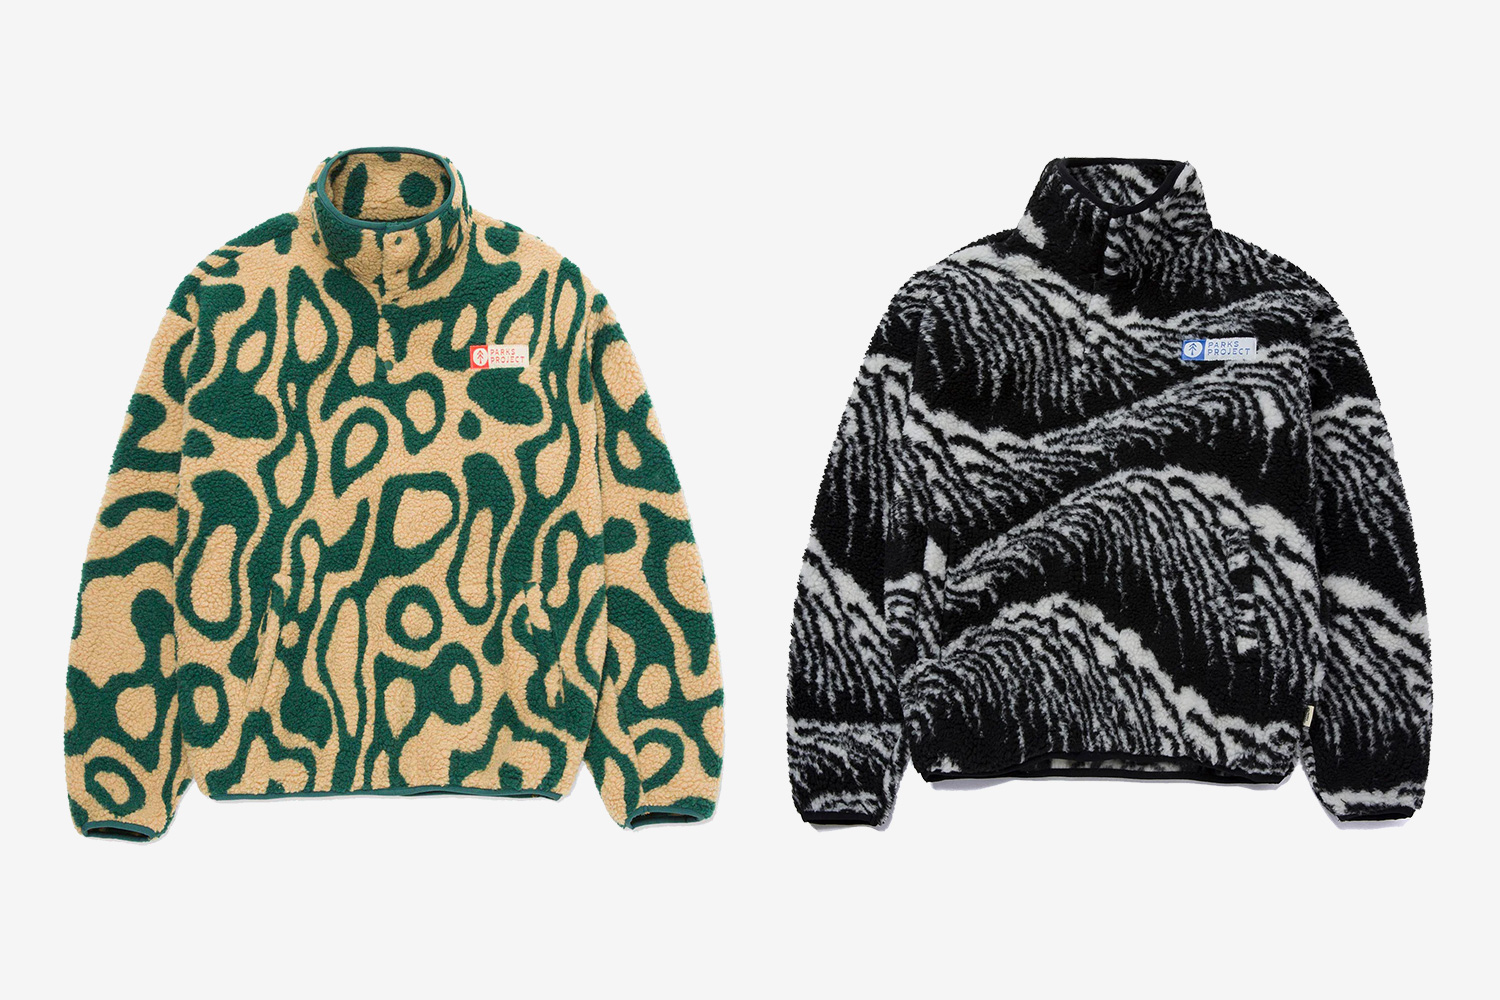 Yellowstone Geysers and Acadia Waves Fleece Pullovers From Parks Project